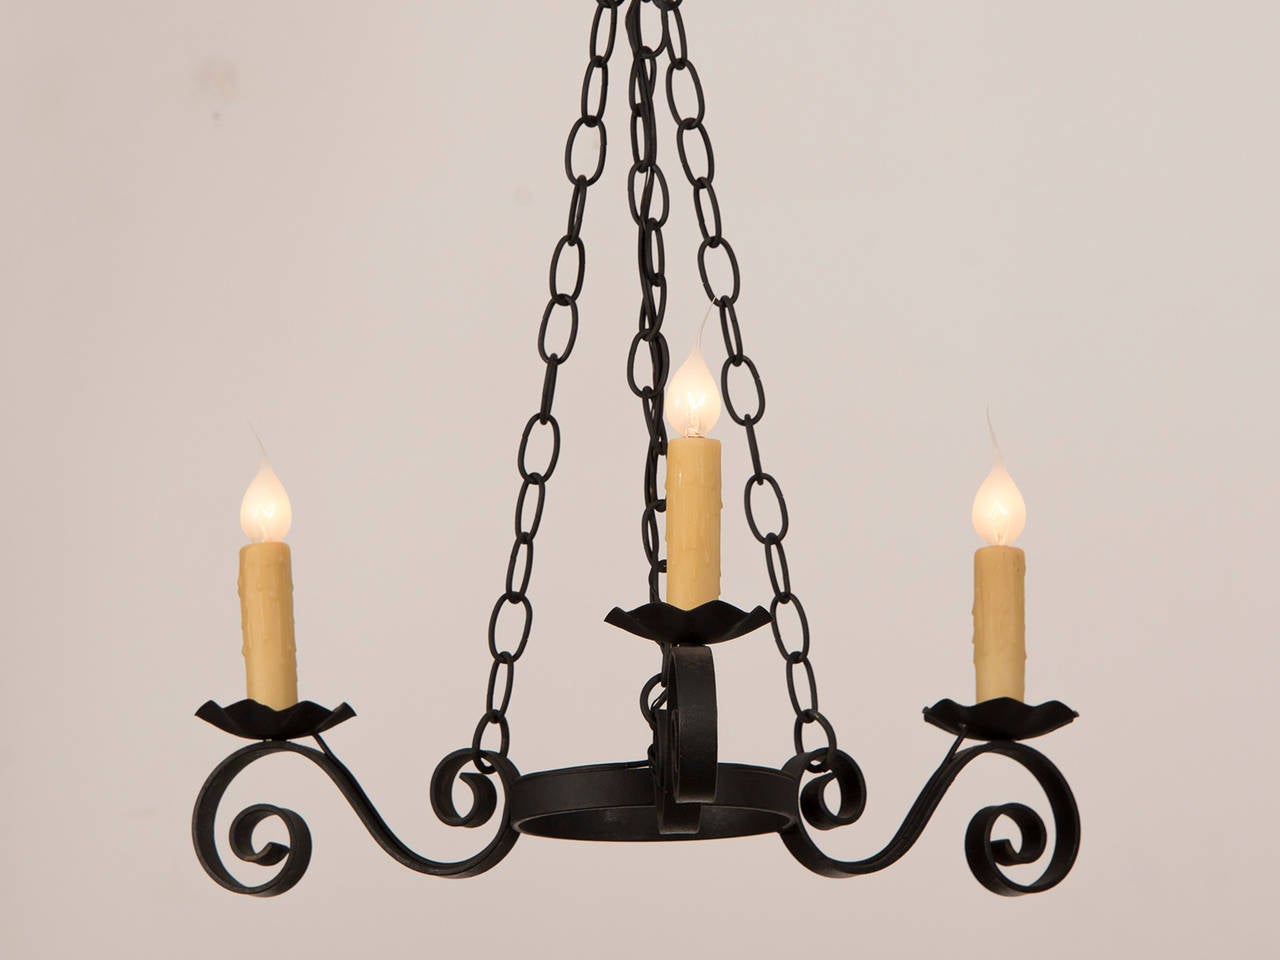 Receive our new selections direct from 1stdibs by email each week. Please click Follow Dealer below and see them first!

A vintage French three arm iron chandelier circa 1950 with a black painted finish. This fixture has been wired for America and